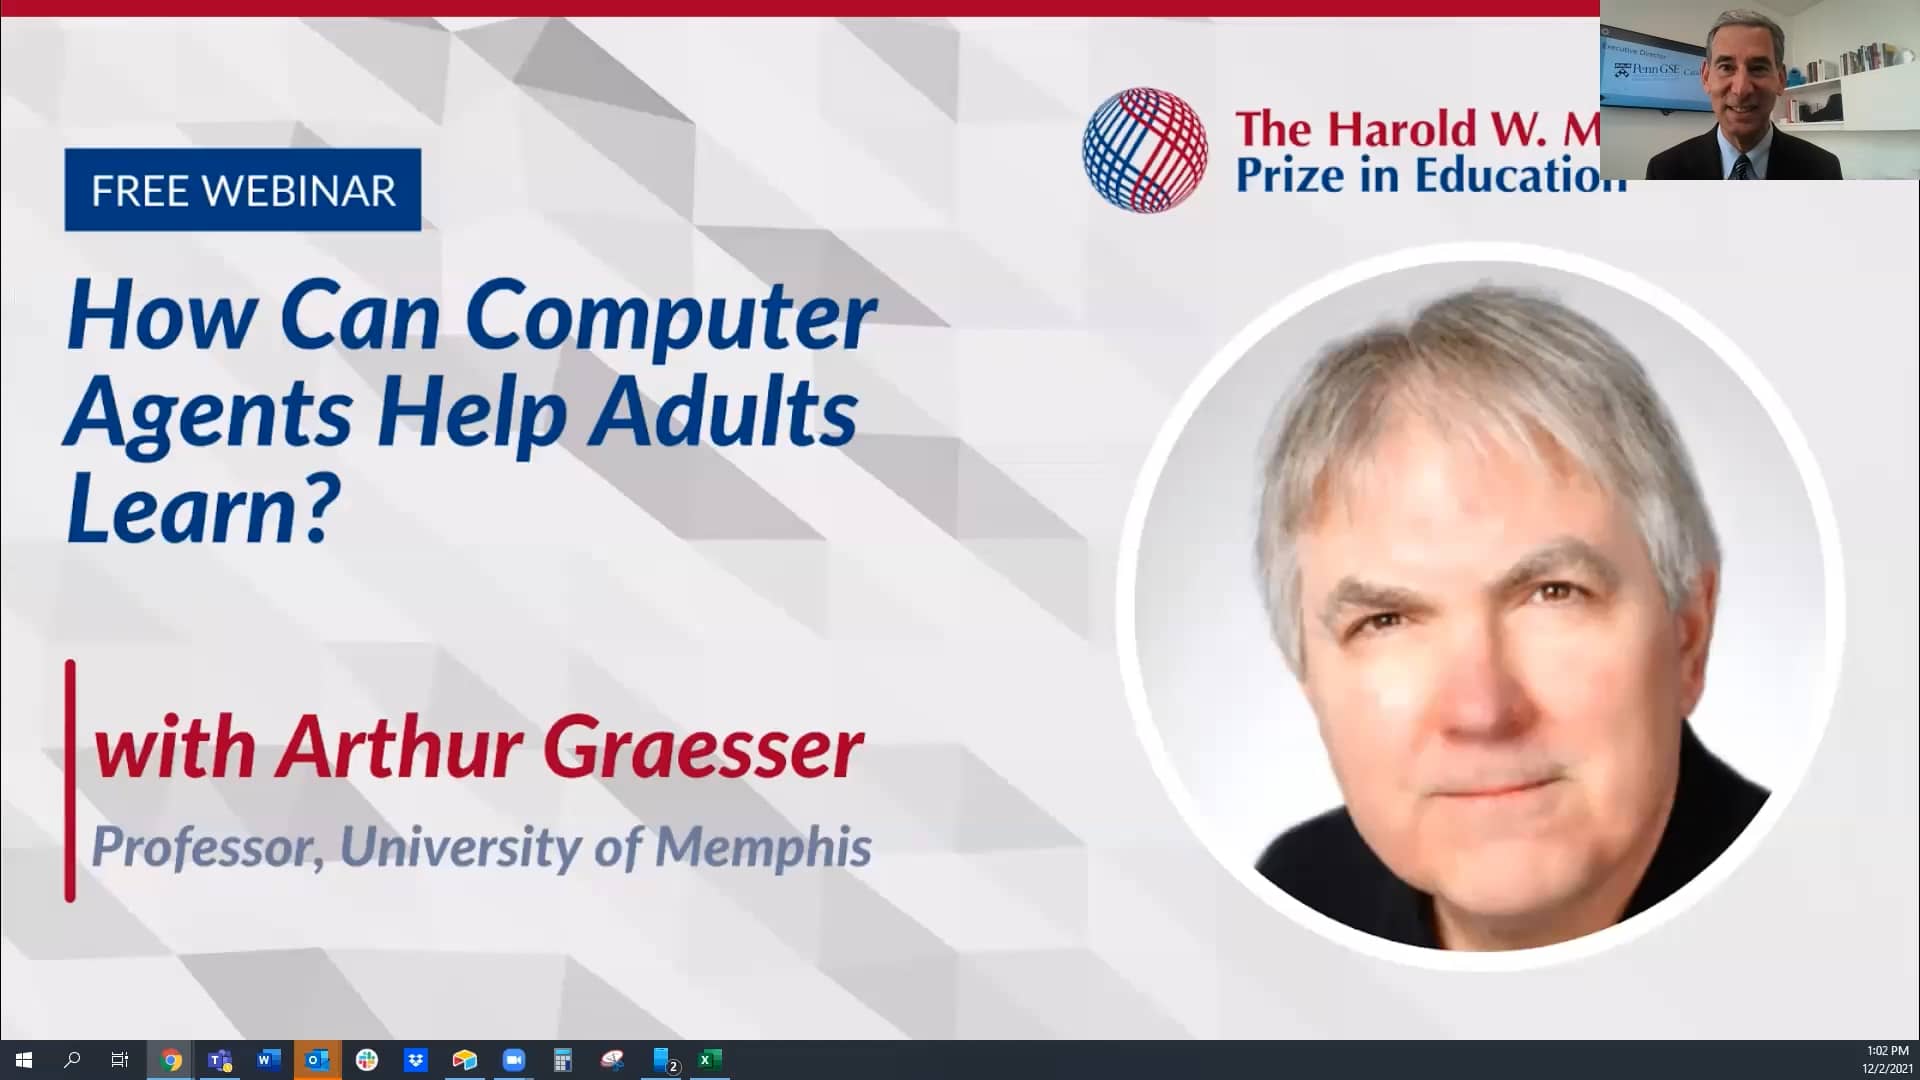 Play video:McGraw Prize Webinar: How Can Computer Agents Help Adults Learn?